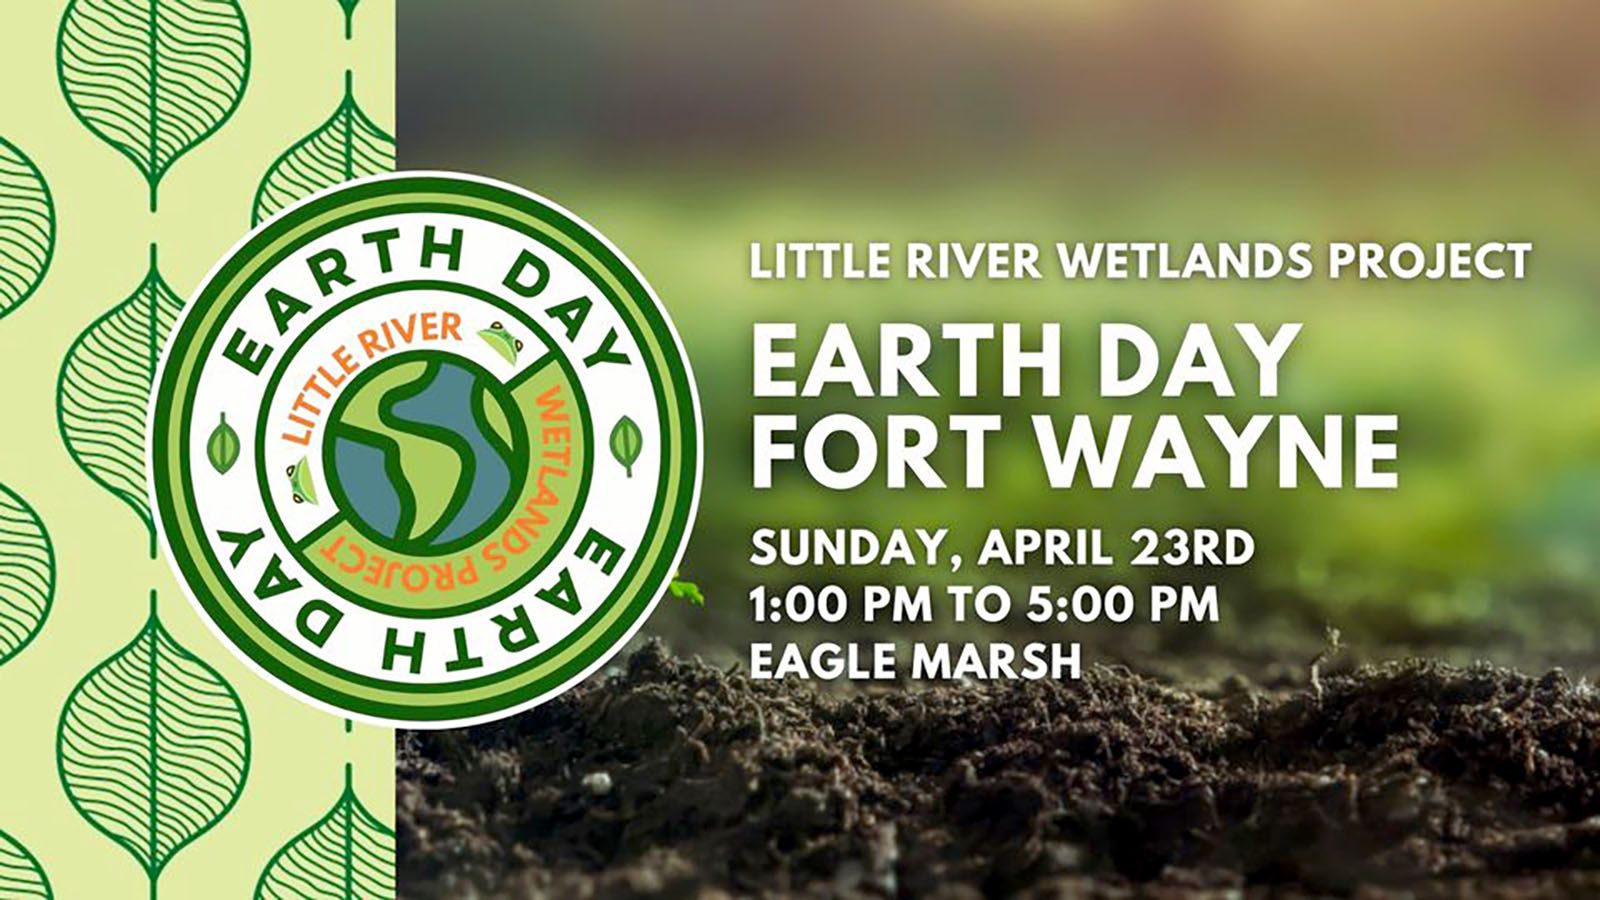 Celebrate Earth Day at Eagle Marsh on April 23.